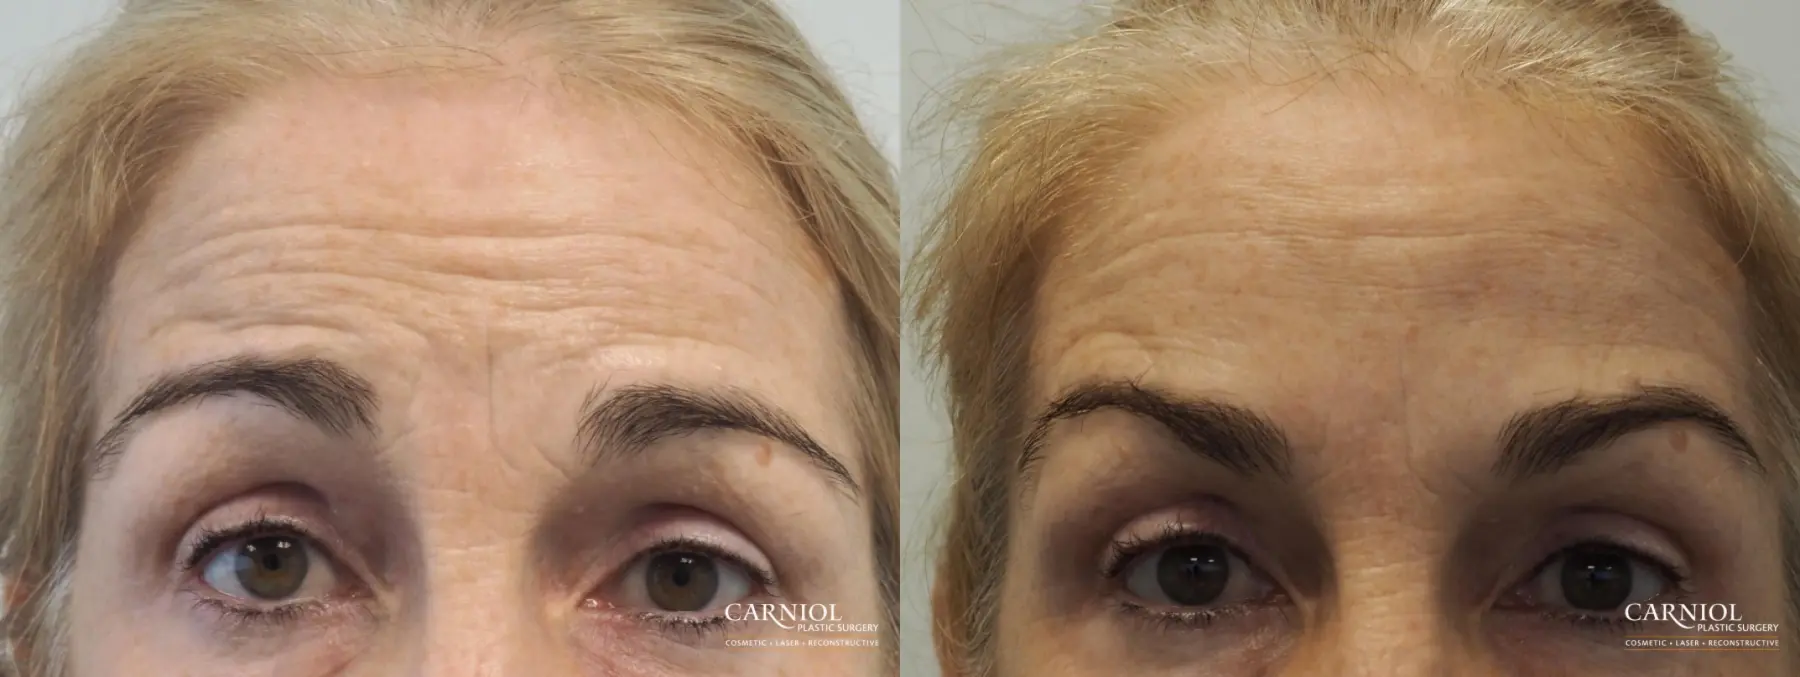 BOTOX® Cosmetic: Patient 5 - Before and After 2